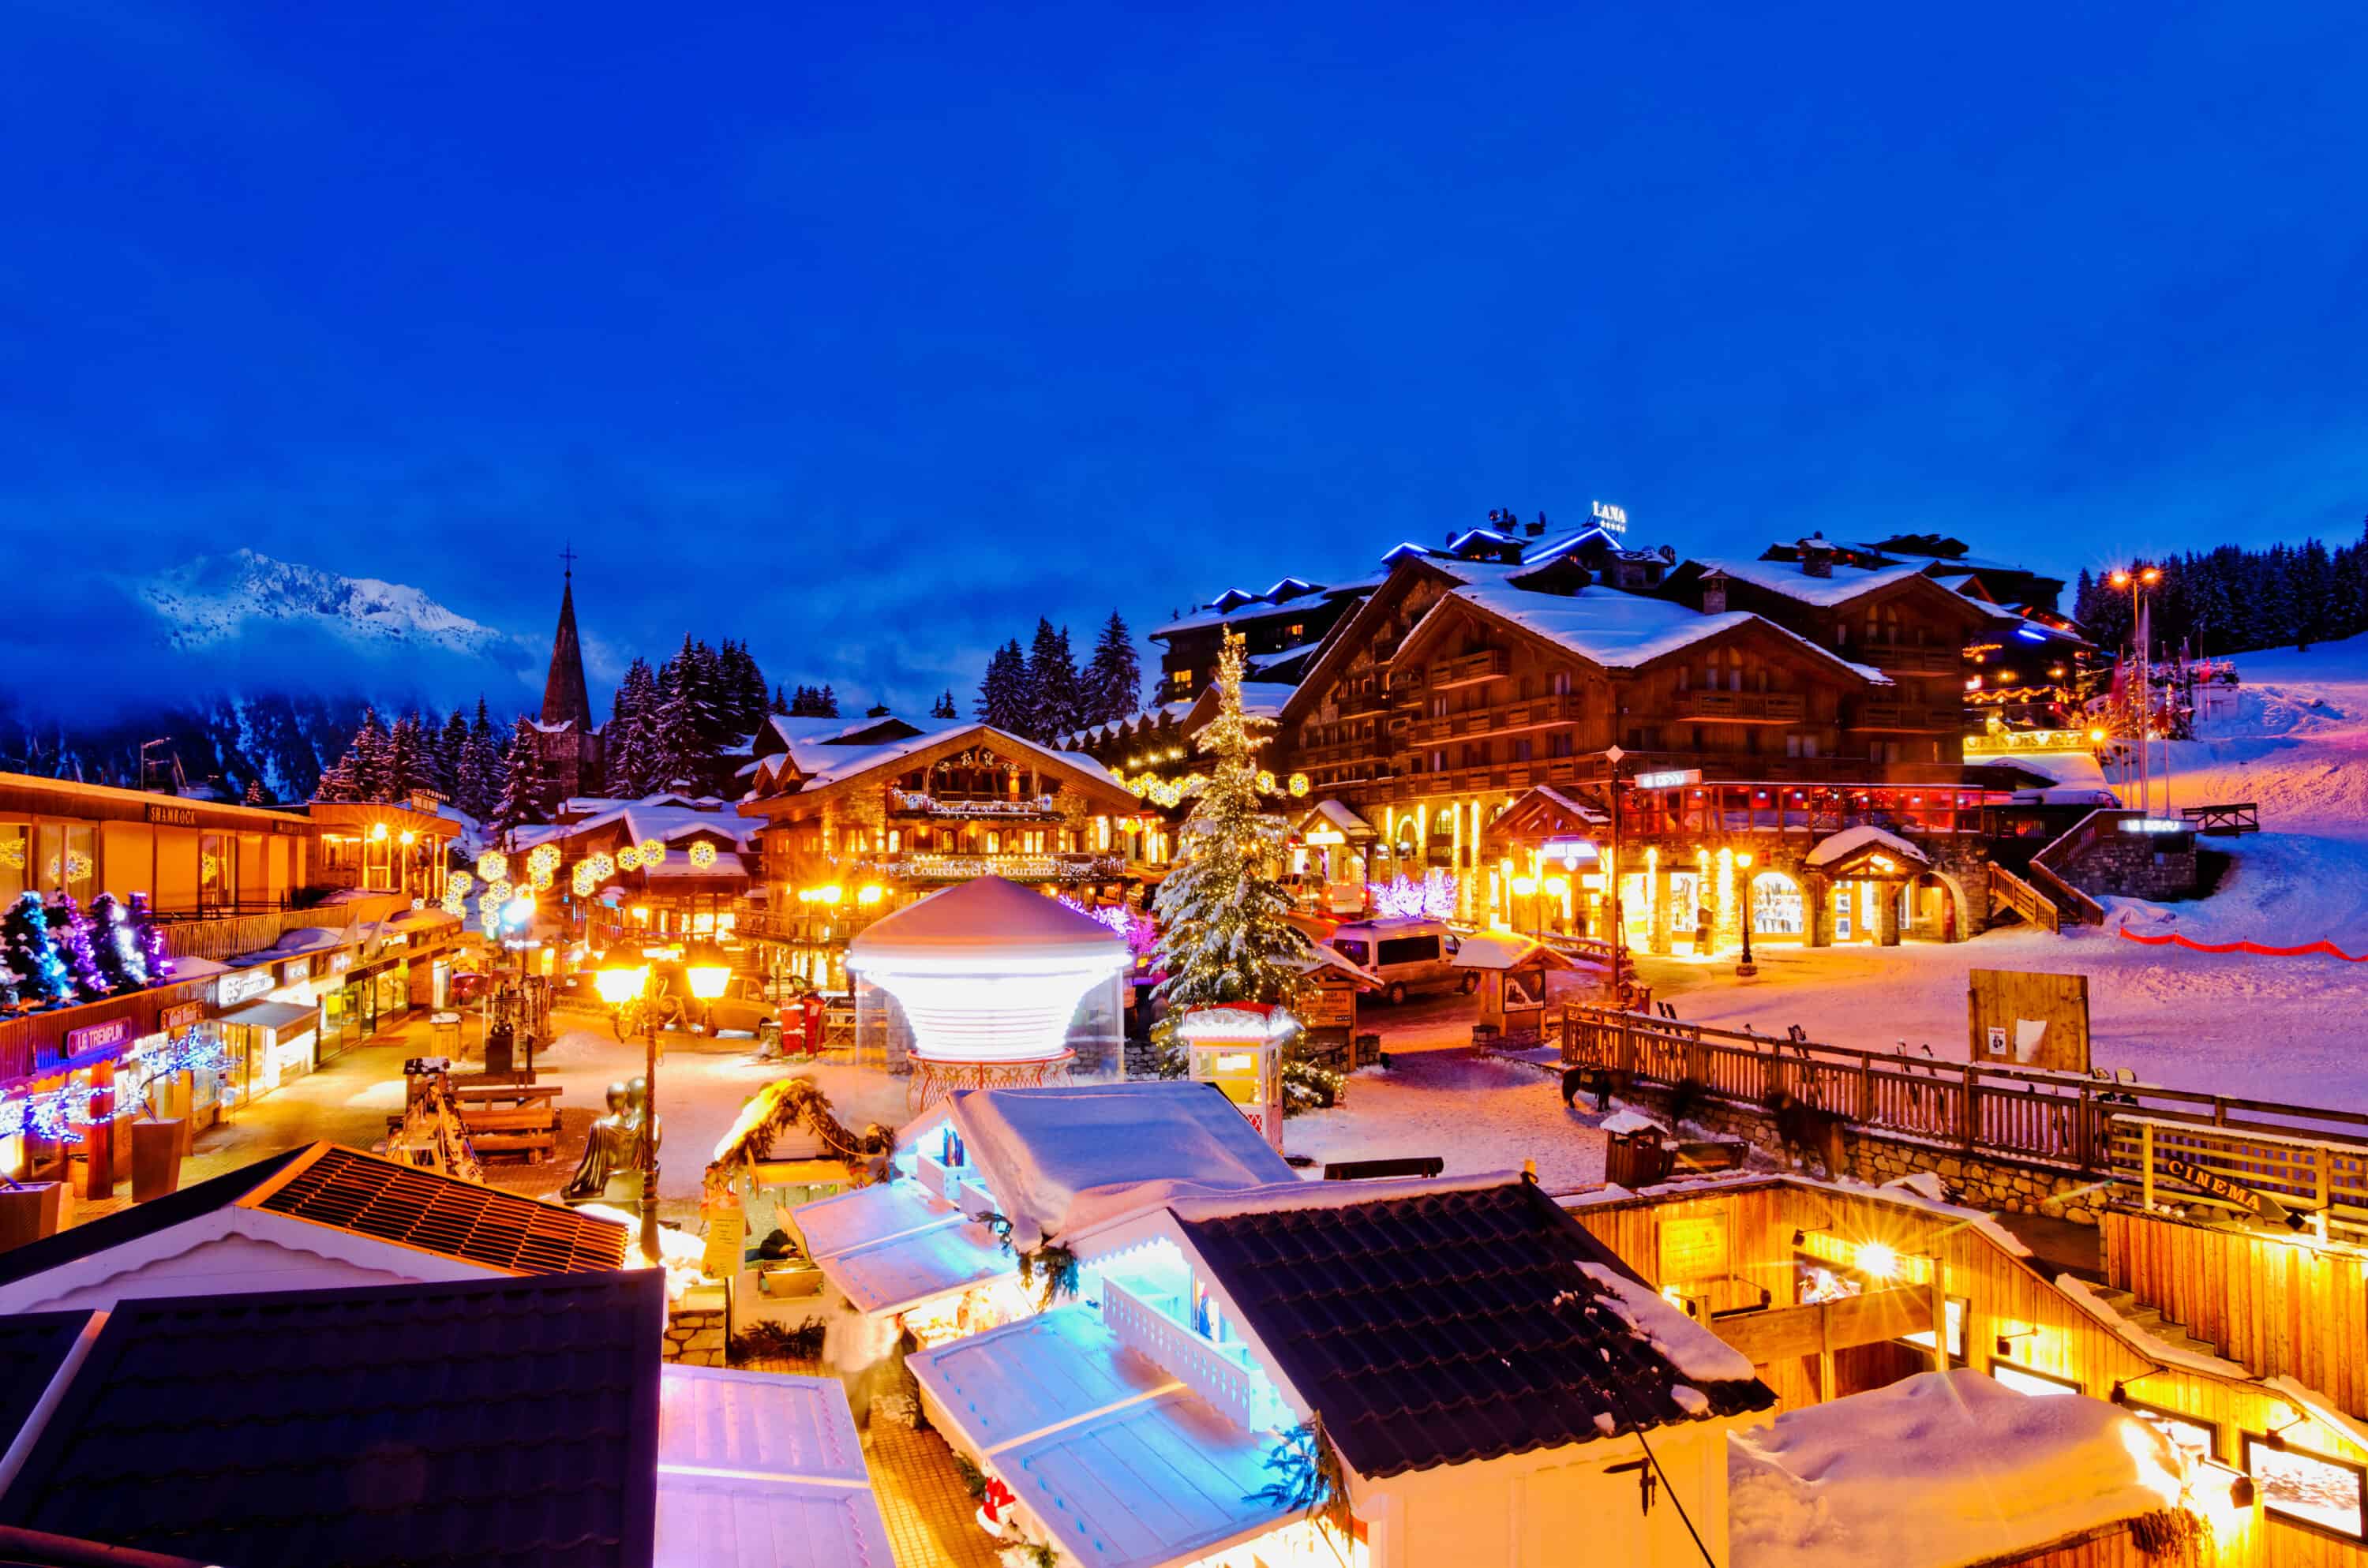 The town of Courchevel lit up at night with mountains in the background.